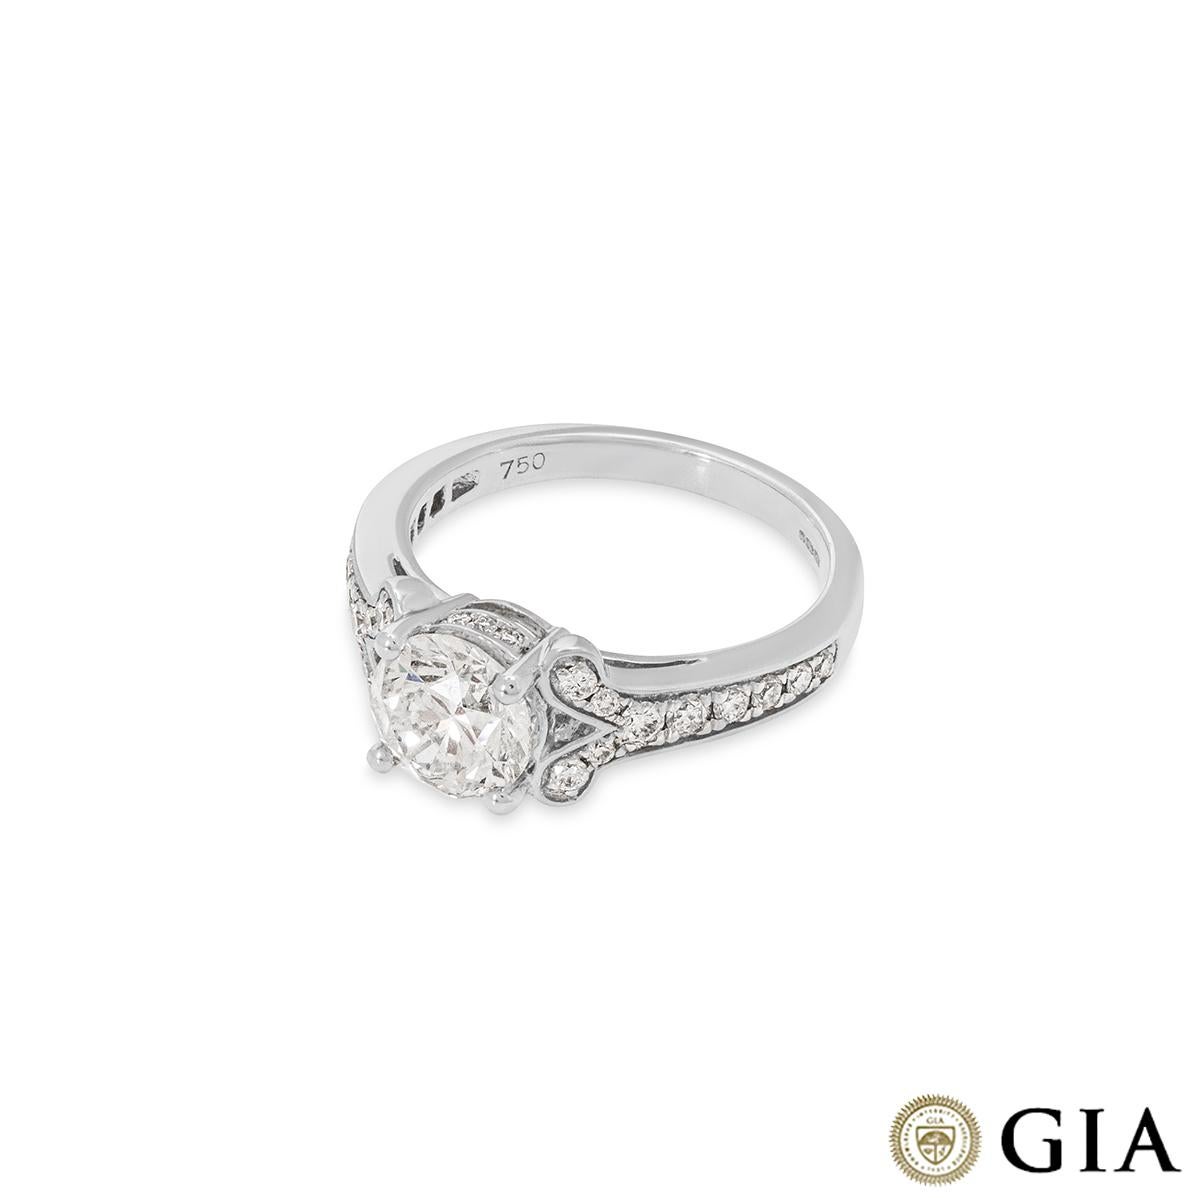 GIA Certified White Gold Round Brilliant Cut Diamond Ring 1.50ct F/SI1 In New Condition For Sale In London, GB